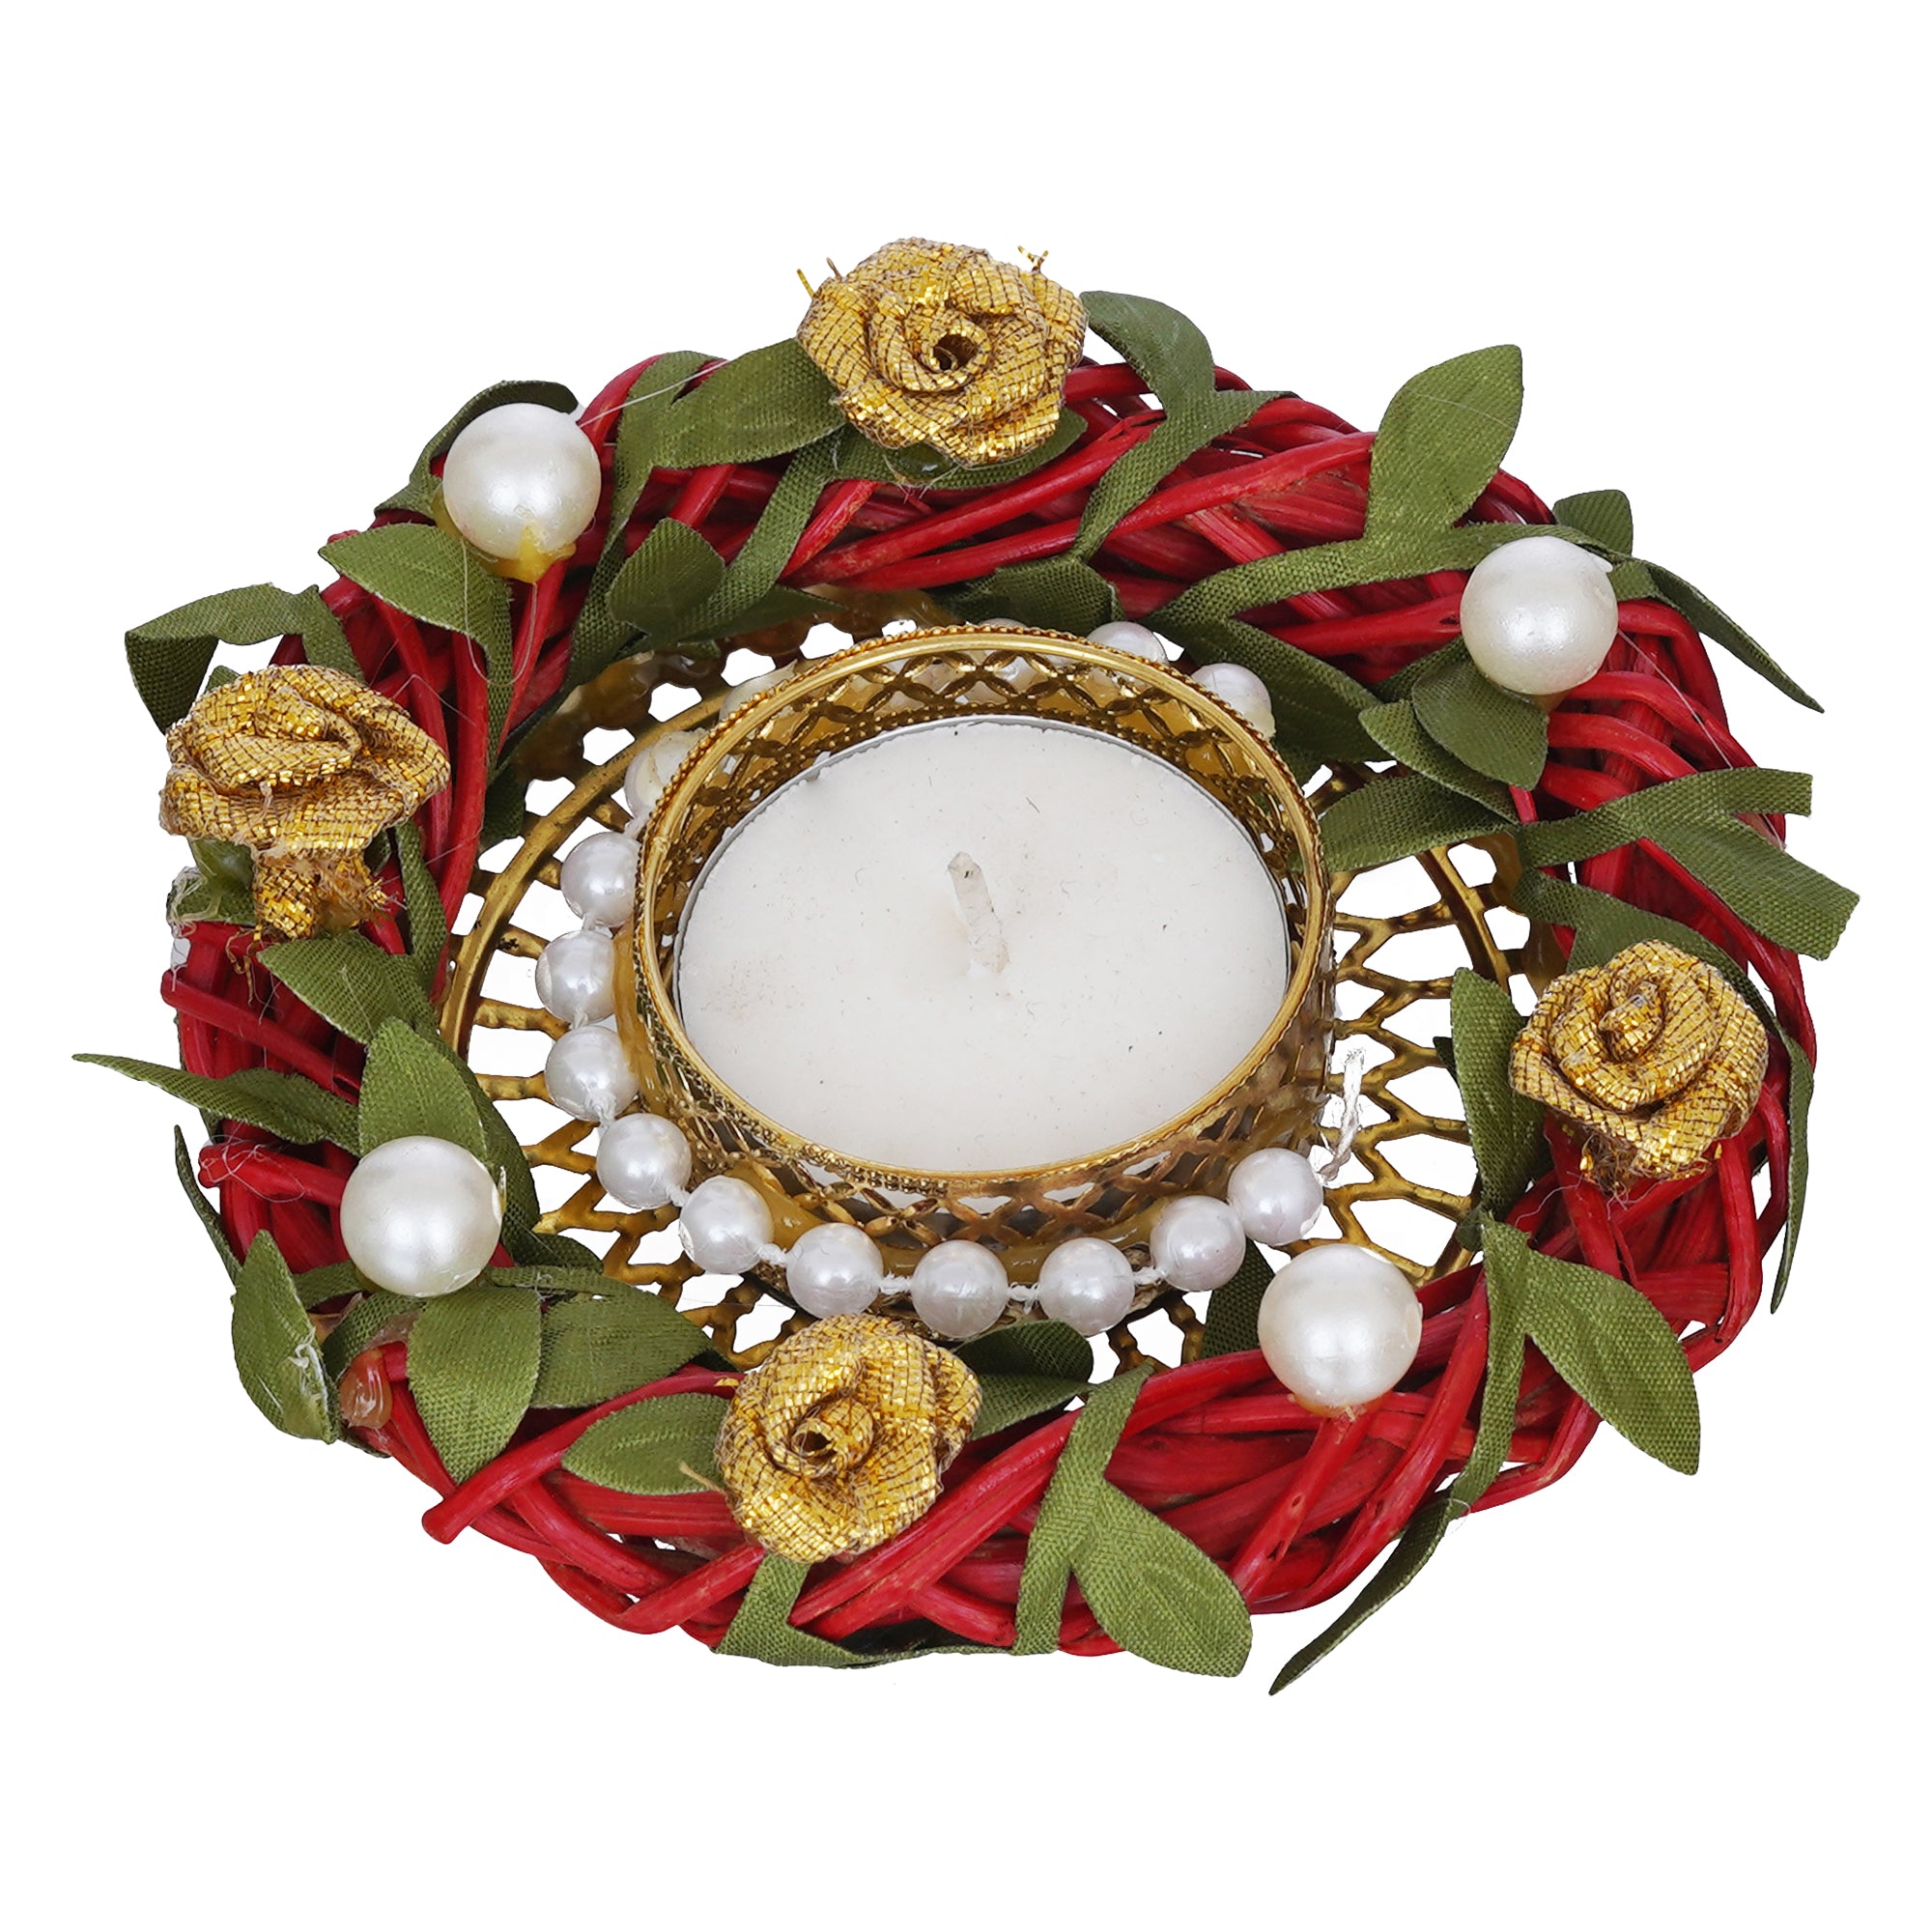 eCraftIndia Floral & Pearl Beads Handcrafted Decorative Tea Light Candle Holder 2